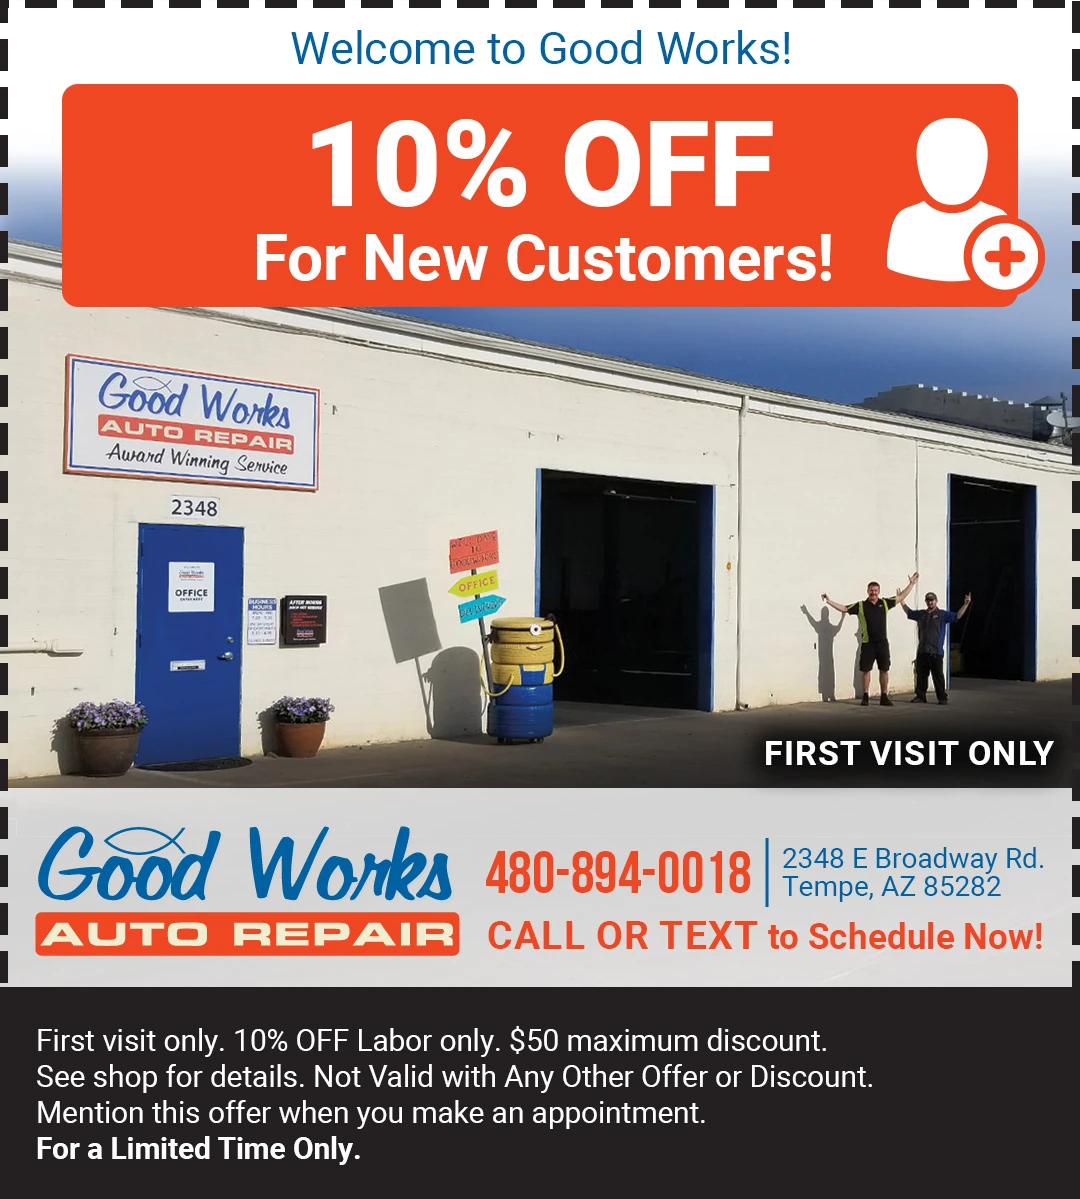 10 percent off cooling system service for new customers